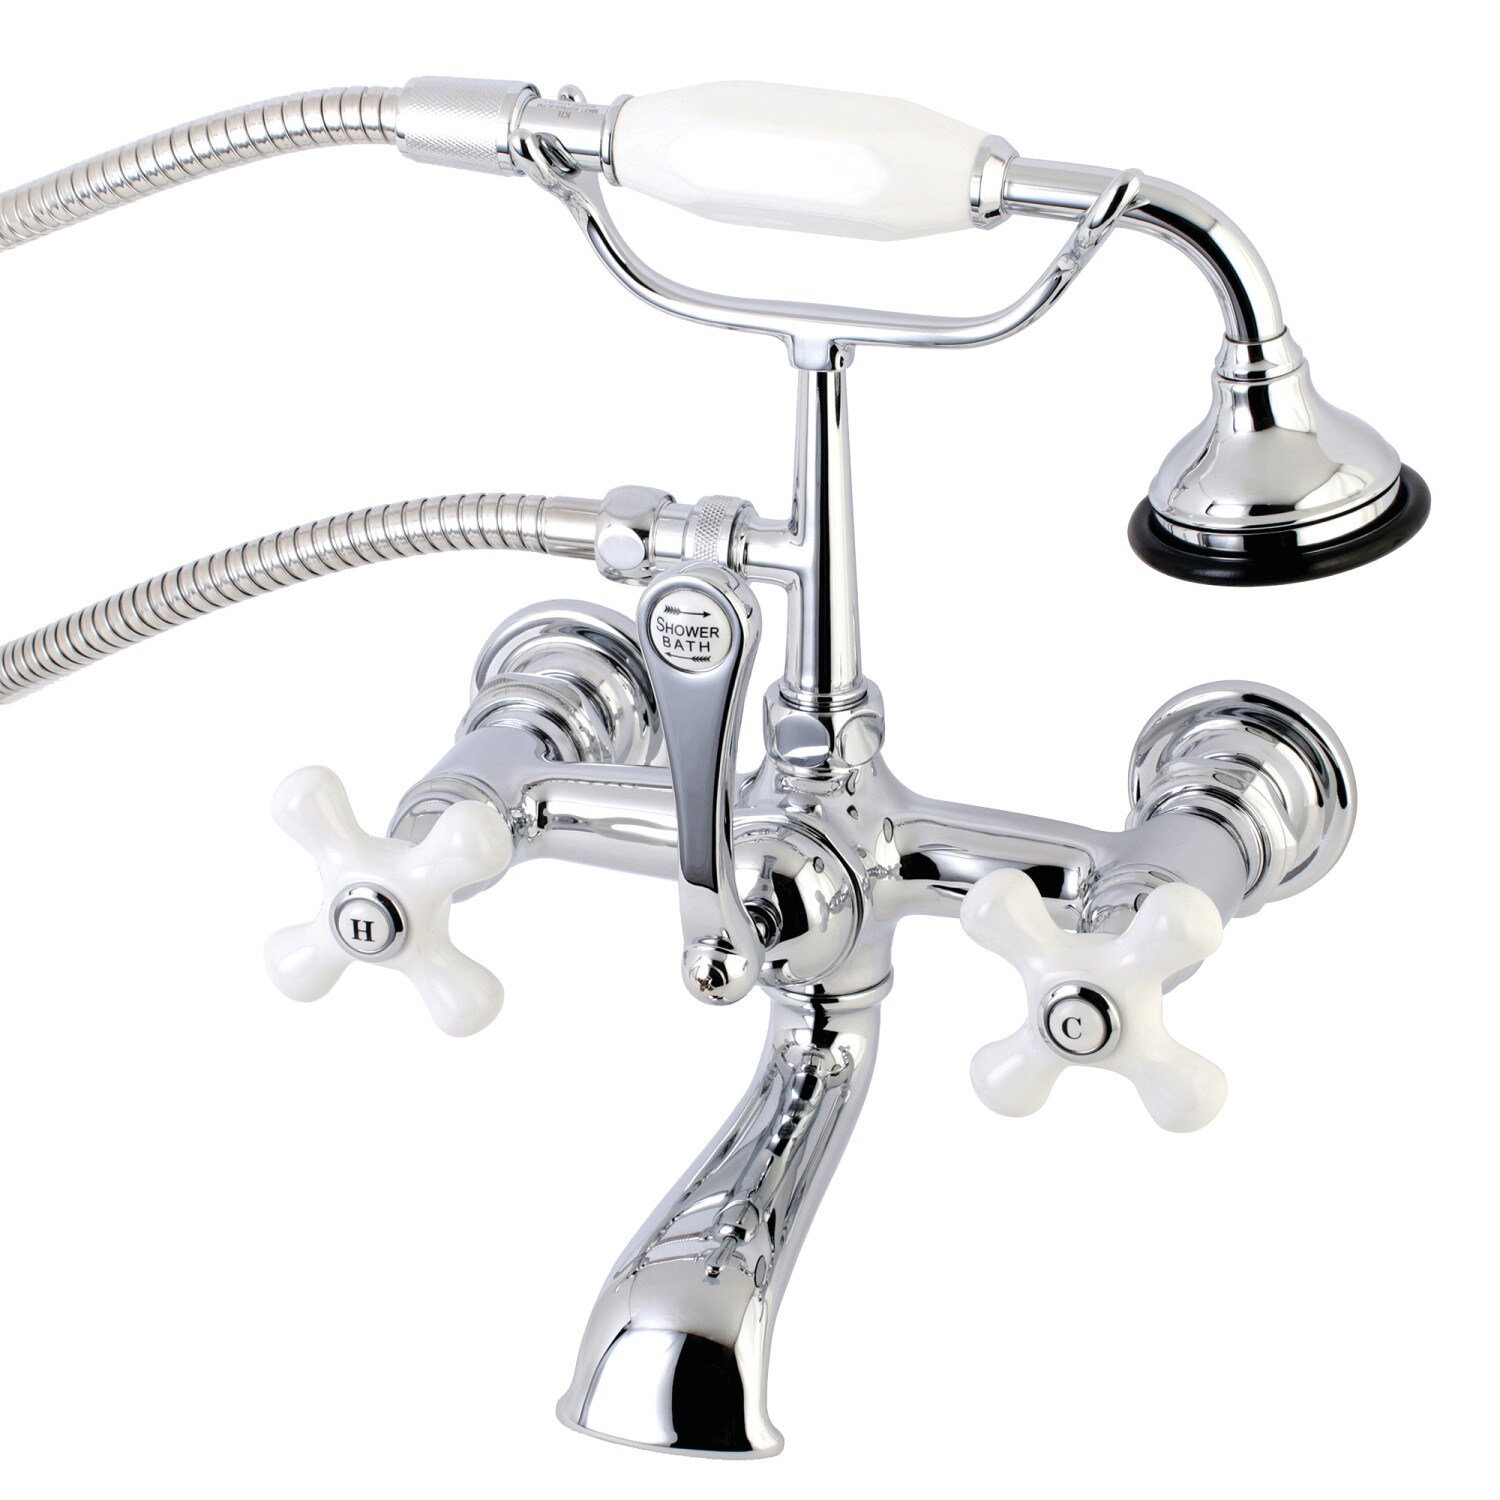 2-Handle Claw Foot Tub Faucet Polished Chrome Antique Bath Tub Faucet Wall Mount 